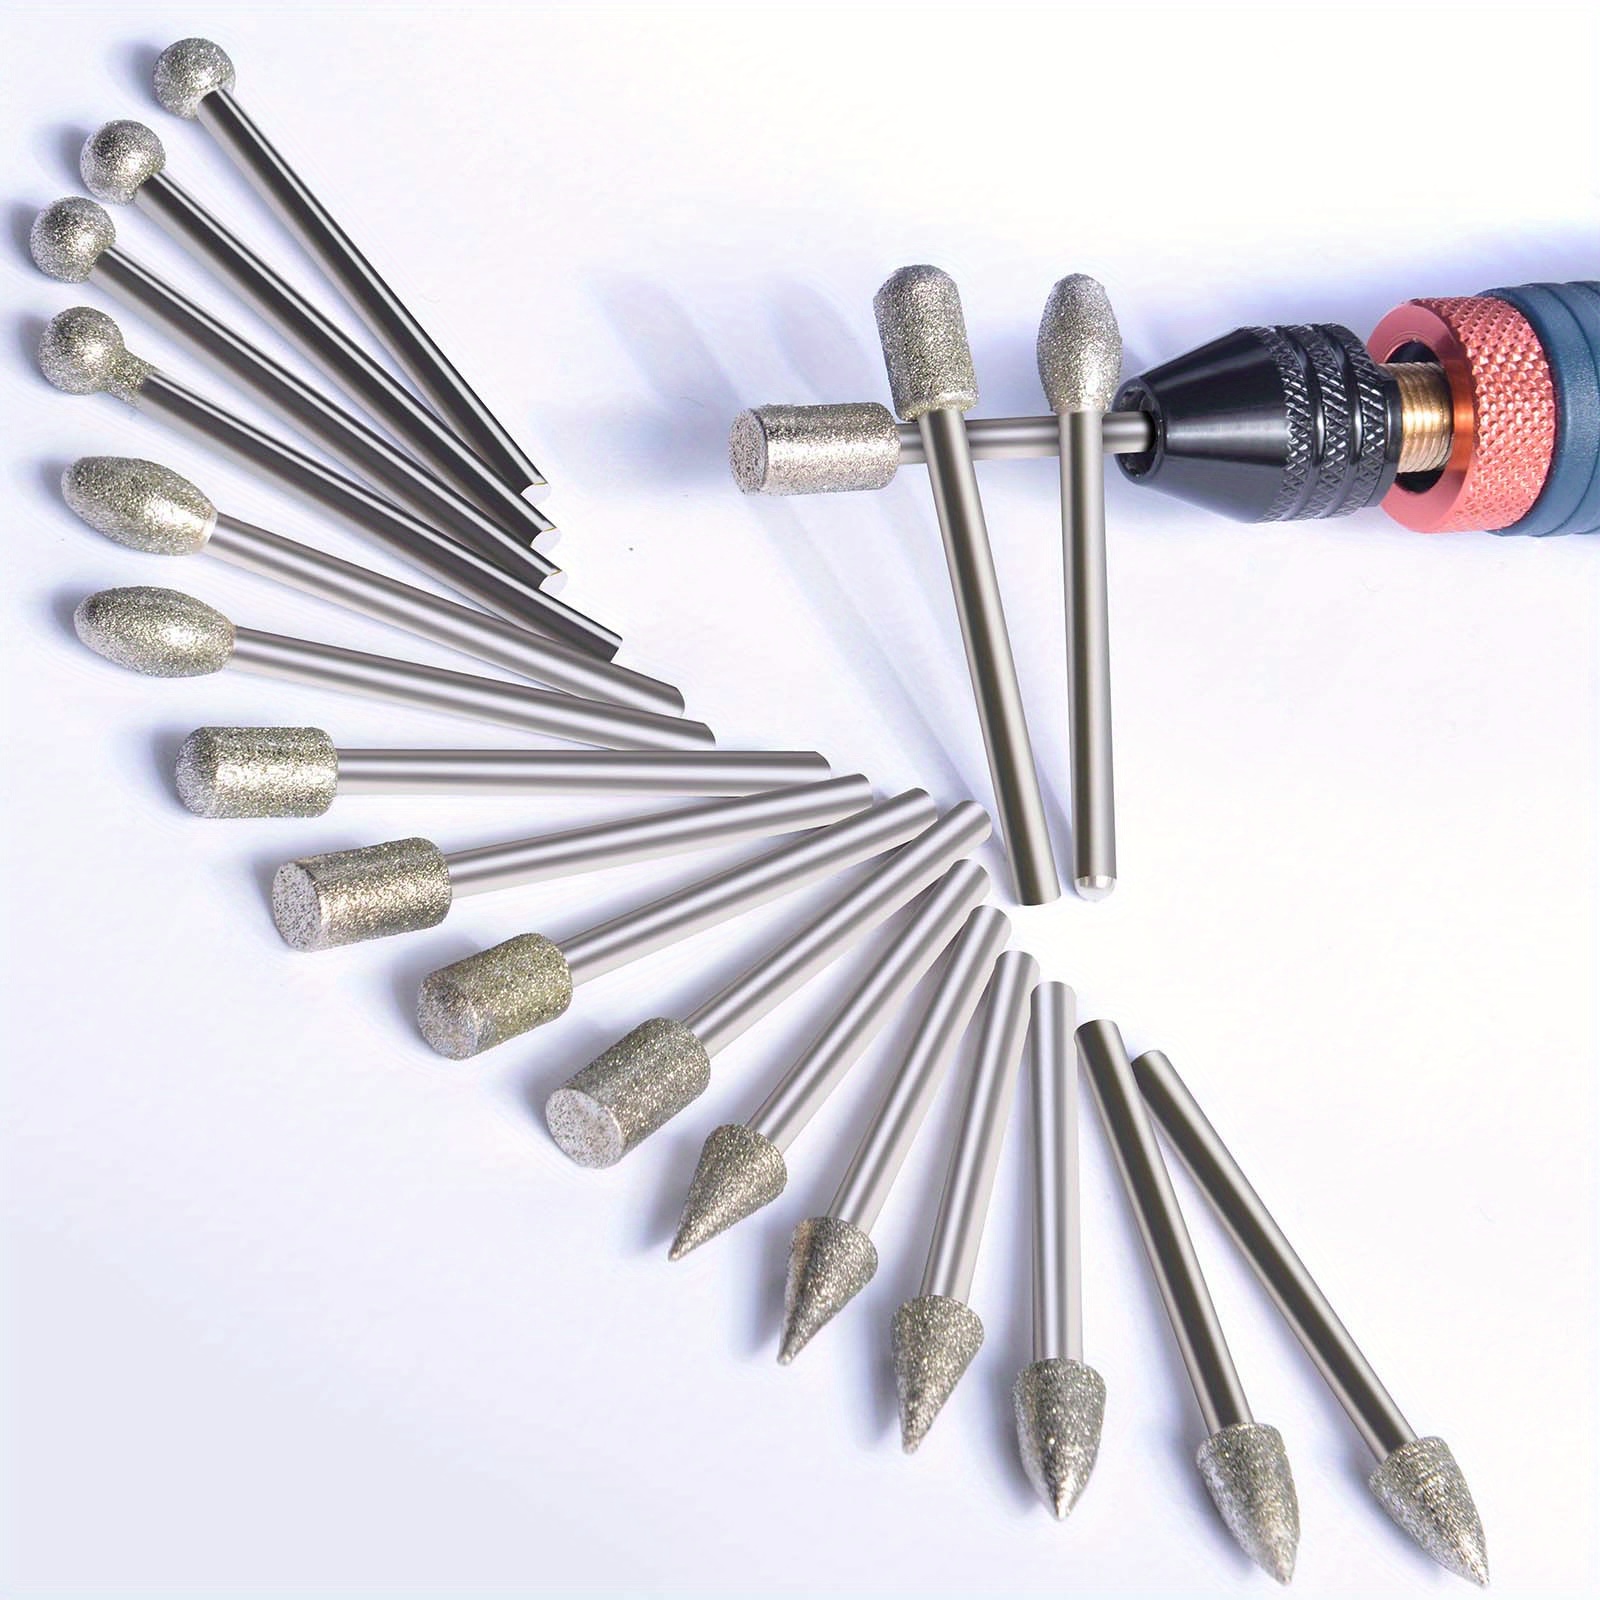 Housoutil 4 Sets Alloy Diamond Grain Stone Carving Tool Set Grinding Bits  Carbide Drill Bits Wood Carving Tools Metal Drill Bits for Hardened Steel Stone  Carving Tools Grinders Power Tools 